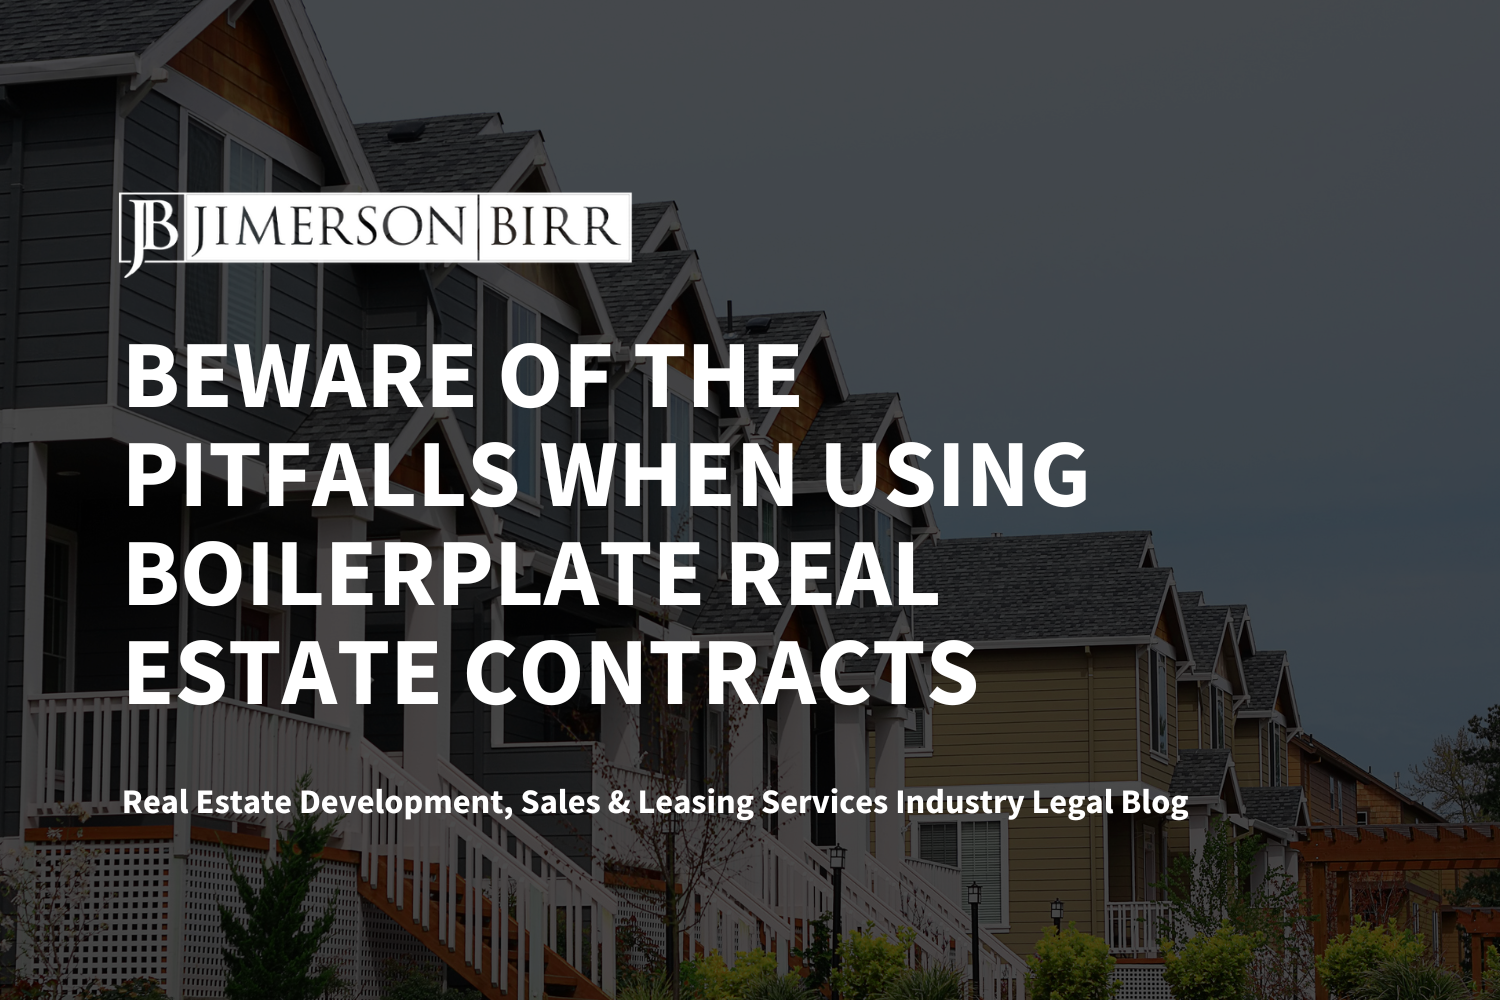 Beware of the Pitfalls When Using Boilerplate Real Estate Contracts